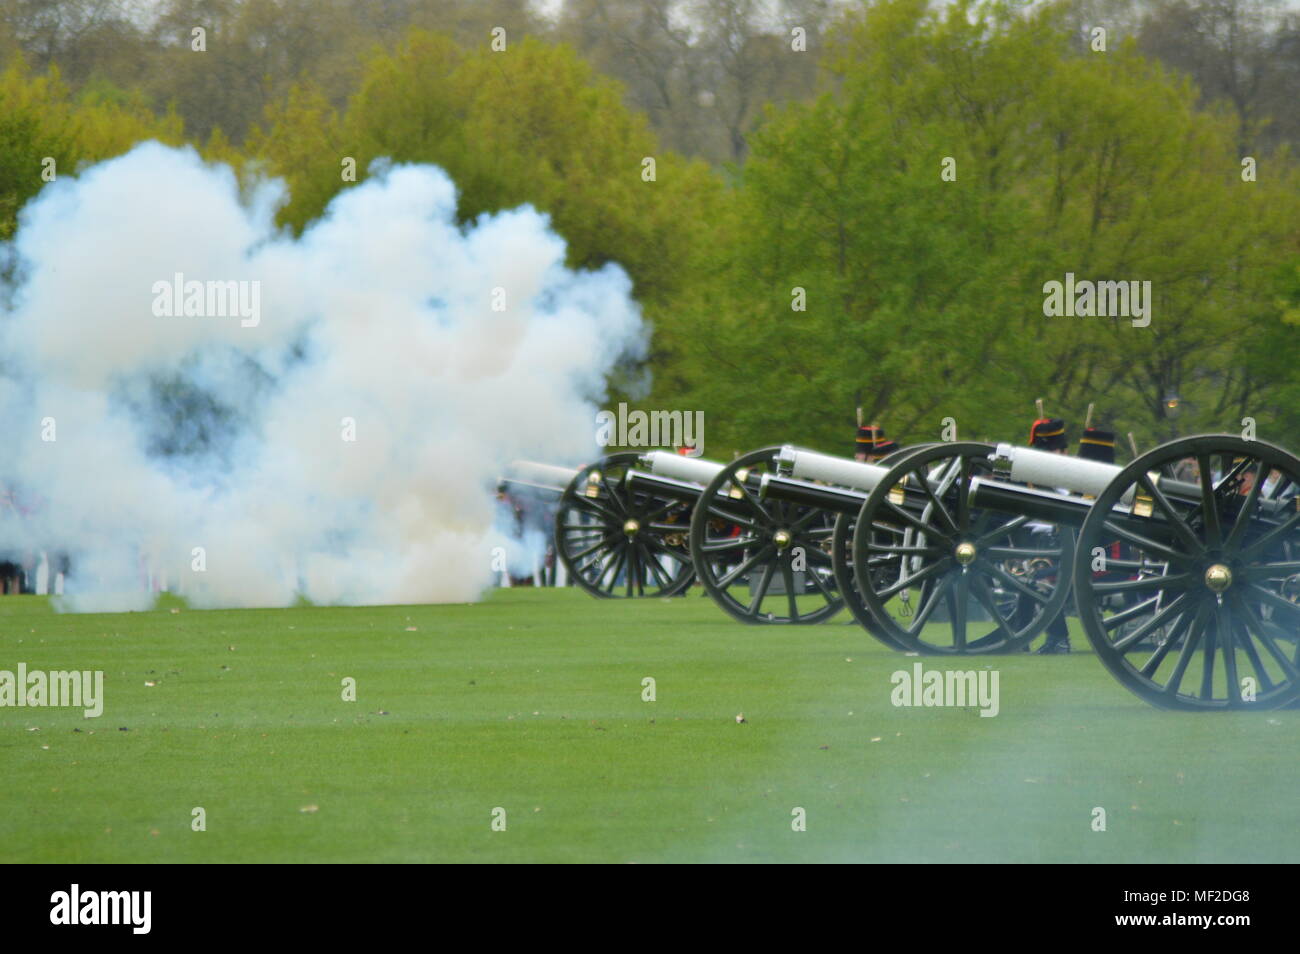 Kings Troop RHA gun salute at Hyde Park to welcome the Duke and